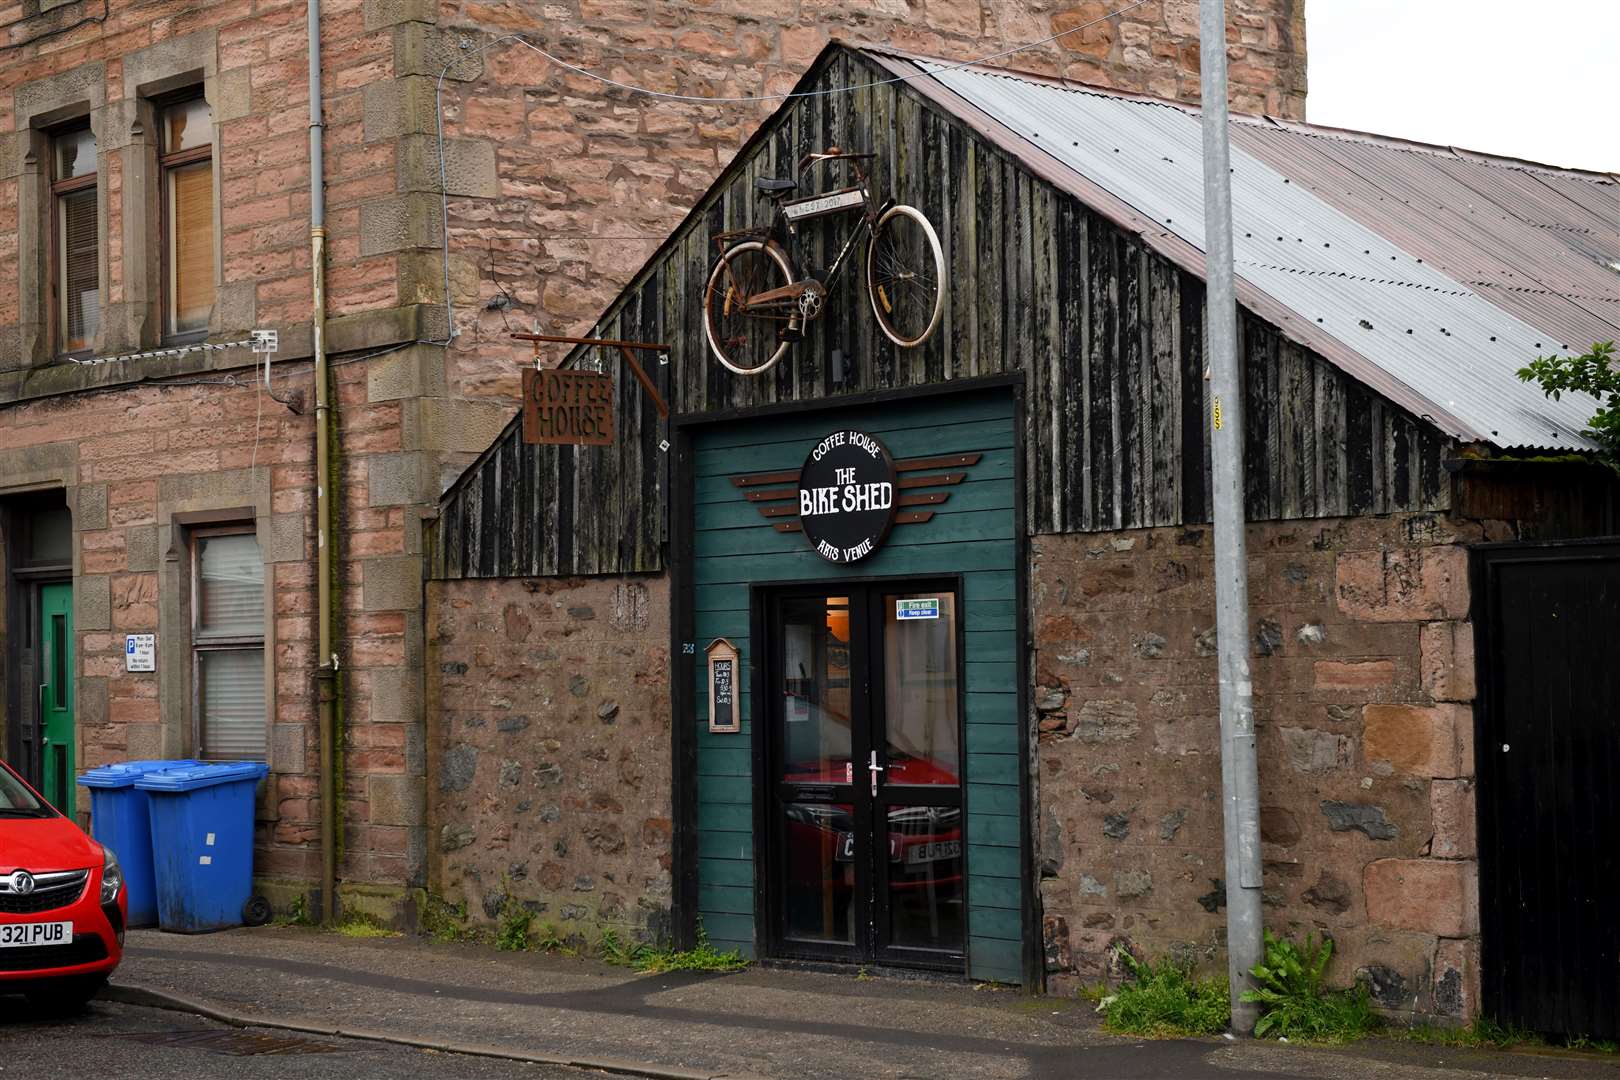 The Bike Shed coffee house and venue in Grant Street, Merkinch.